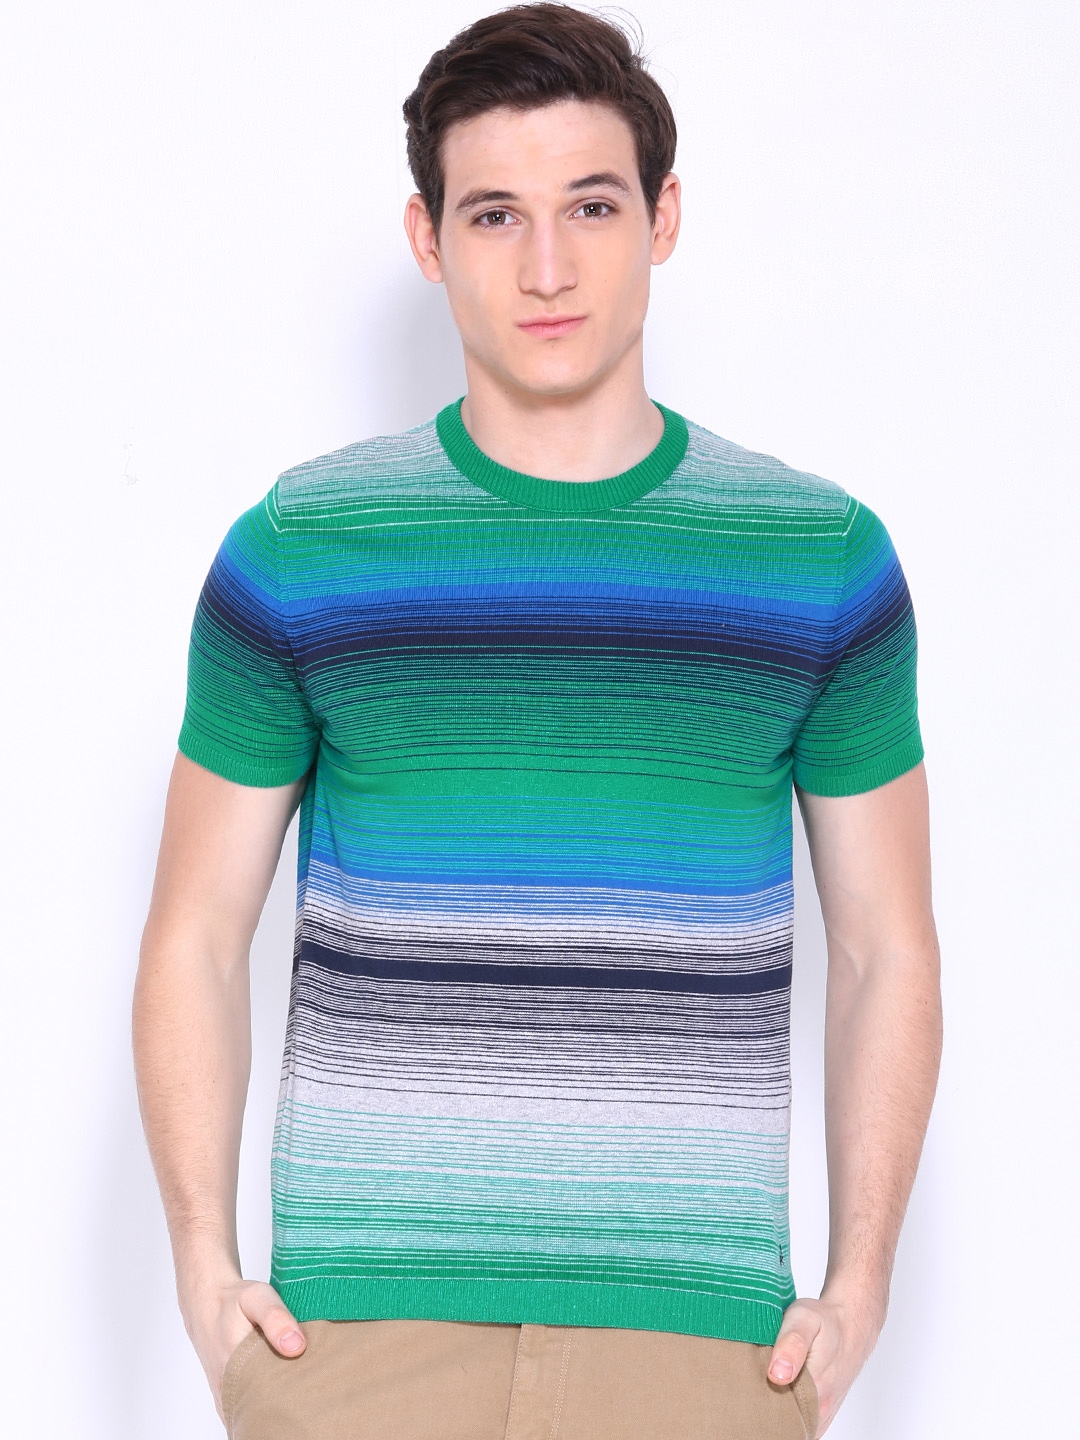 Home Clothing Men Clothing Sweaters United Colors of Benetton Sweaters